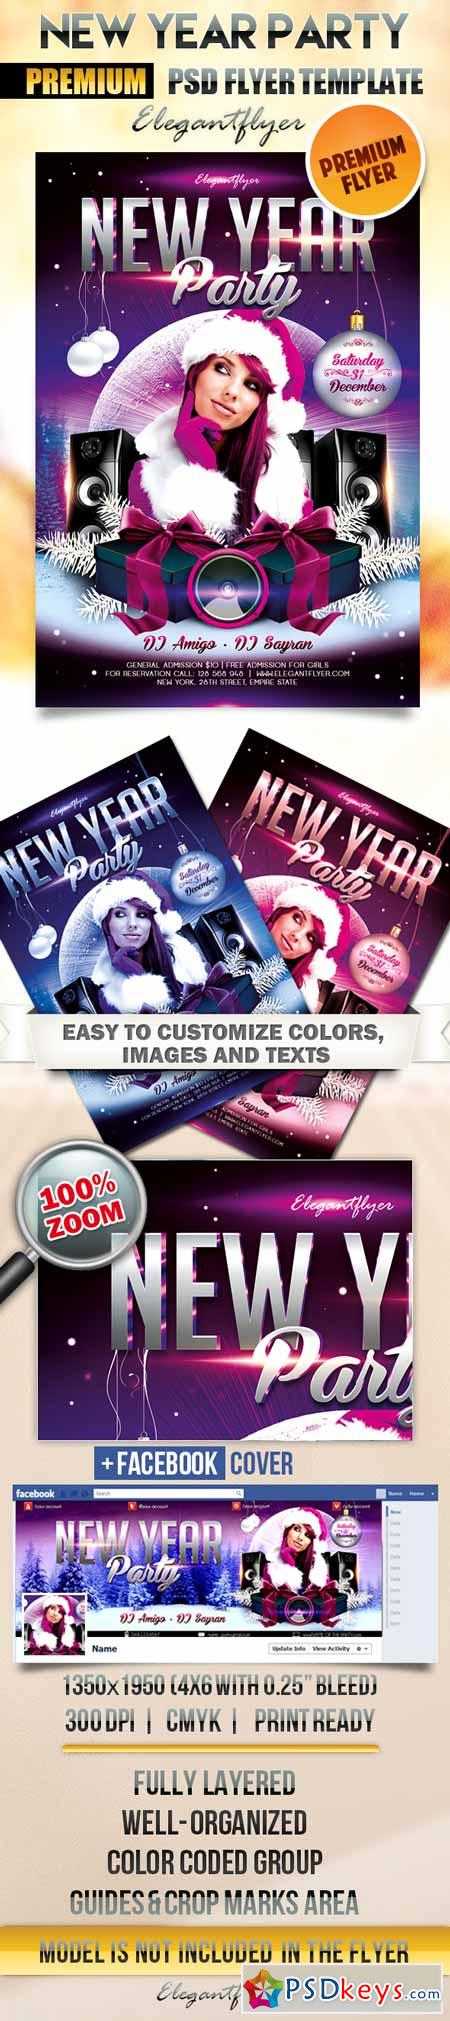 New Year Party  Flyer PSD Template + Facebook Cover